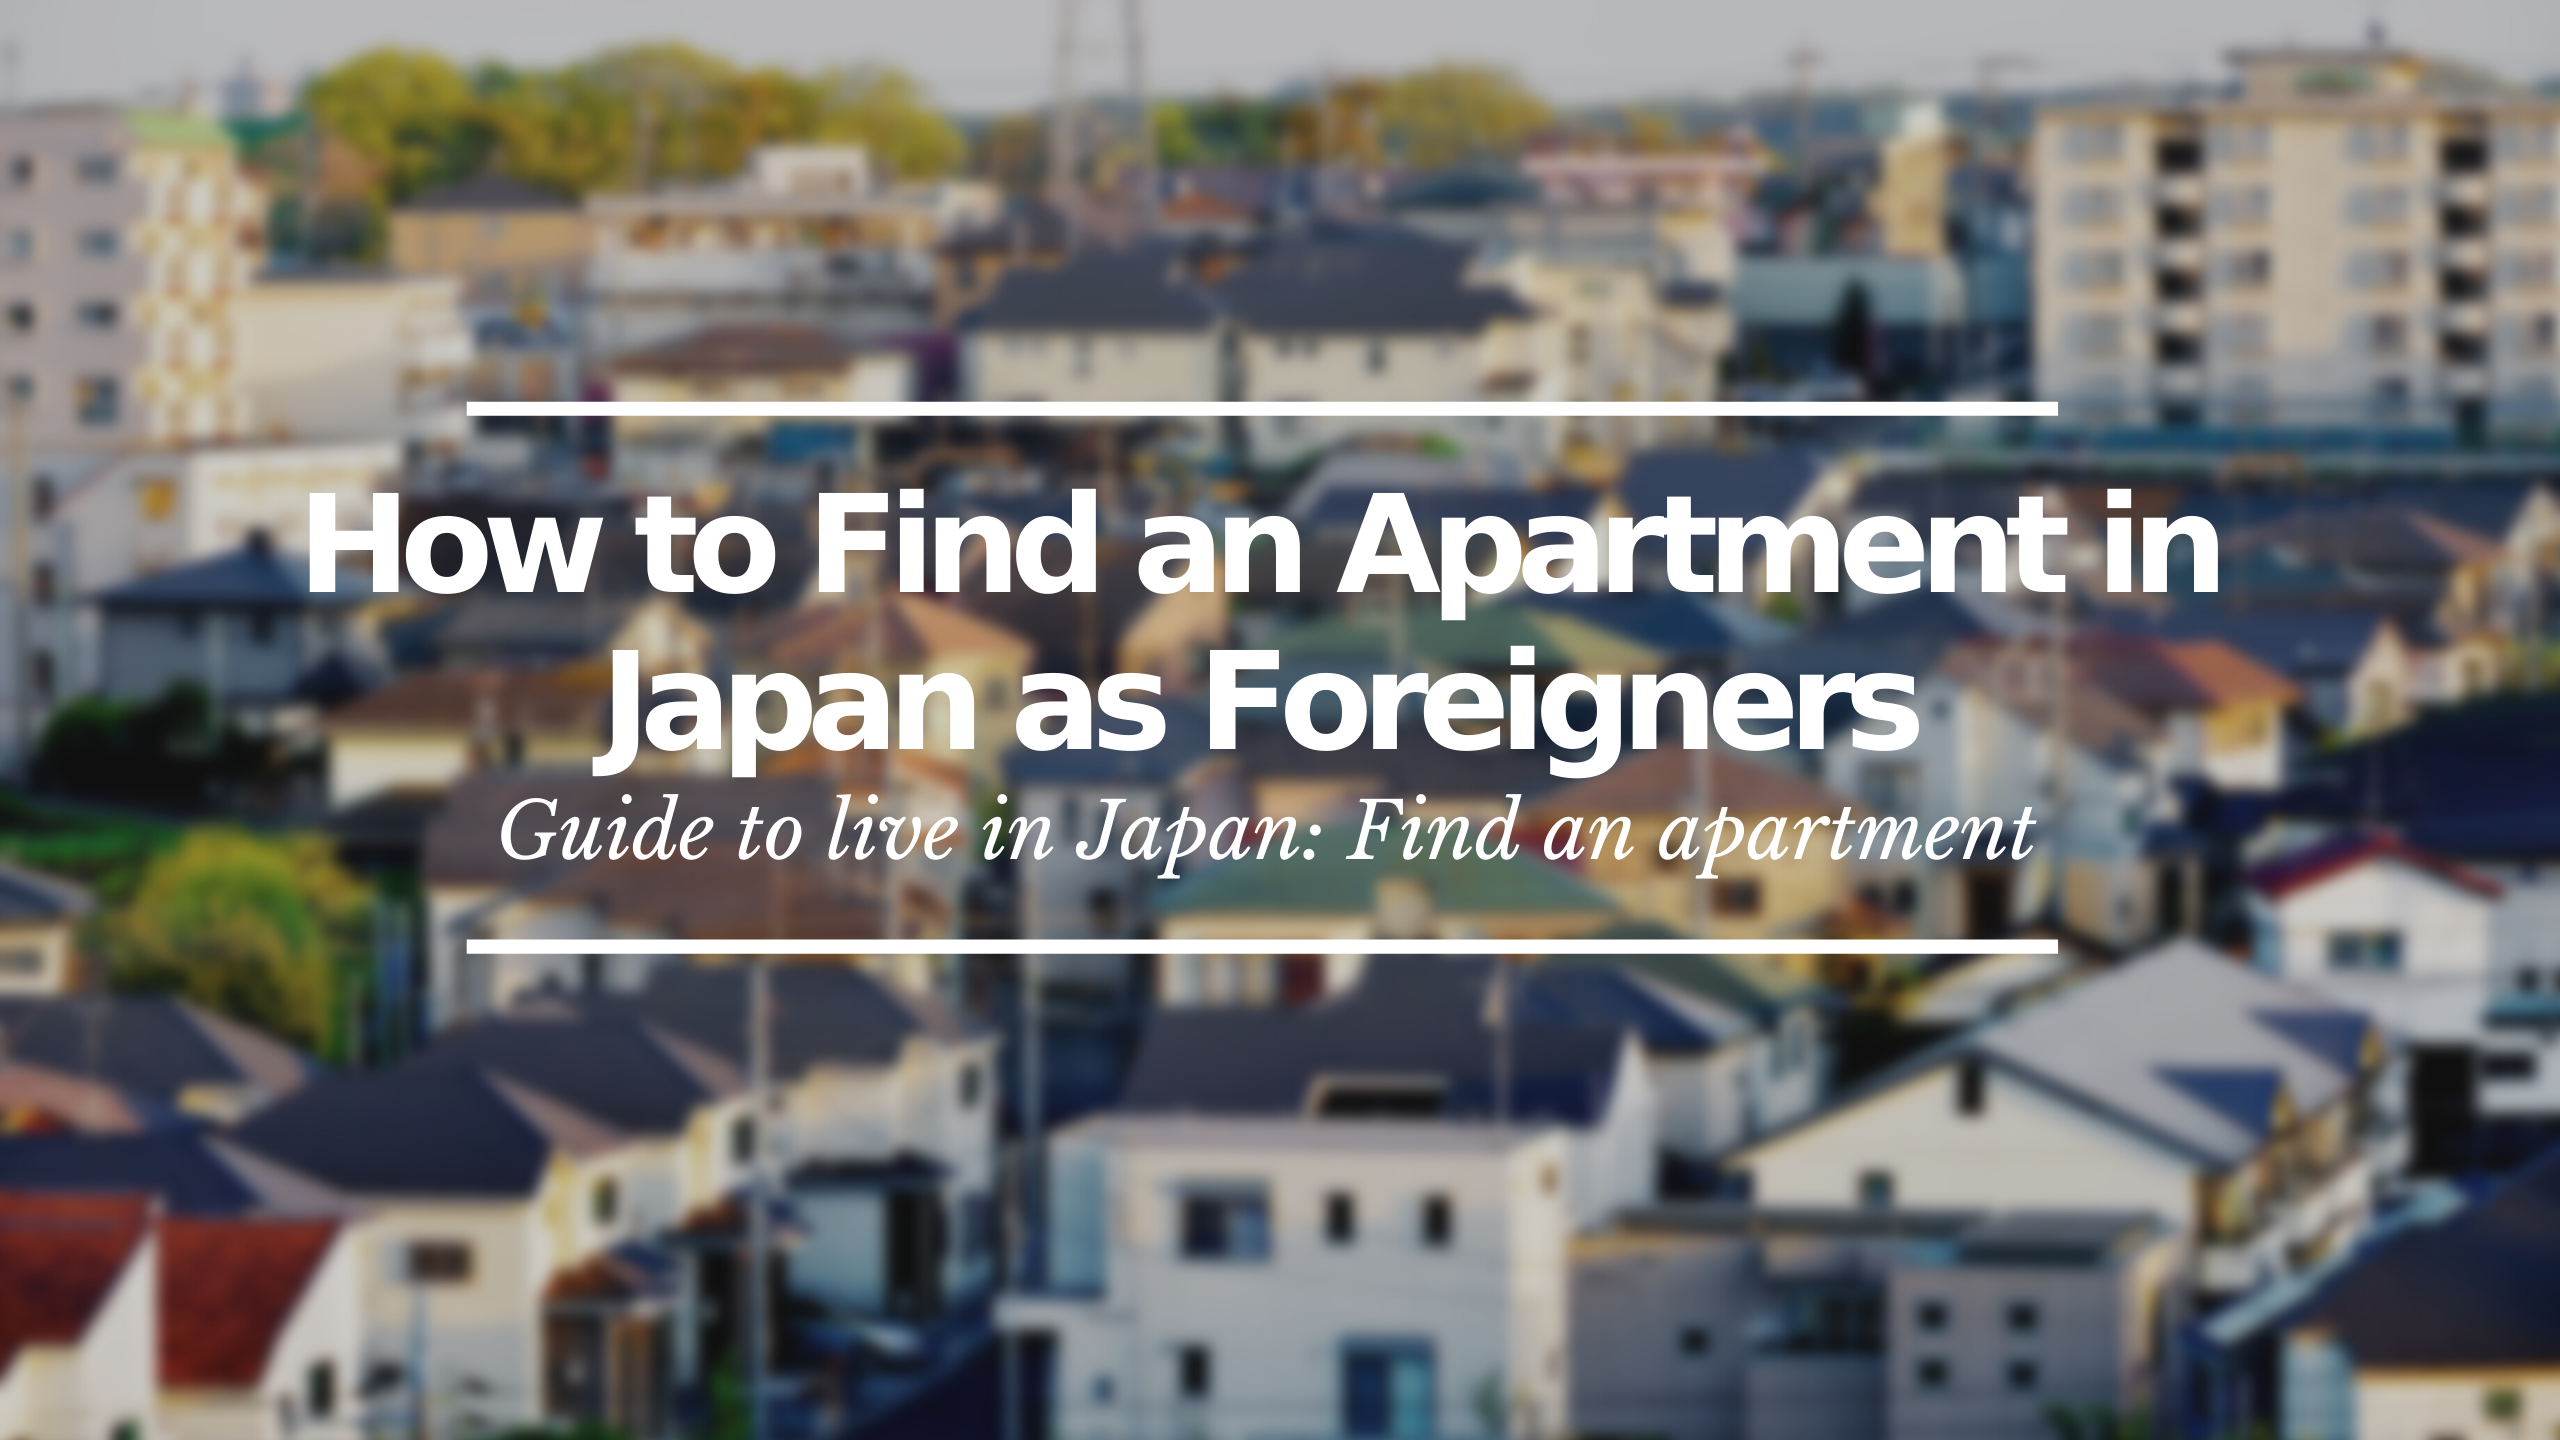 How to Find an Apartment in Japan as Forgeiner